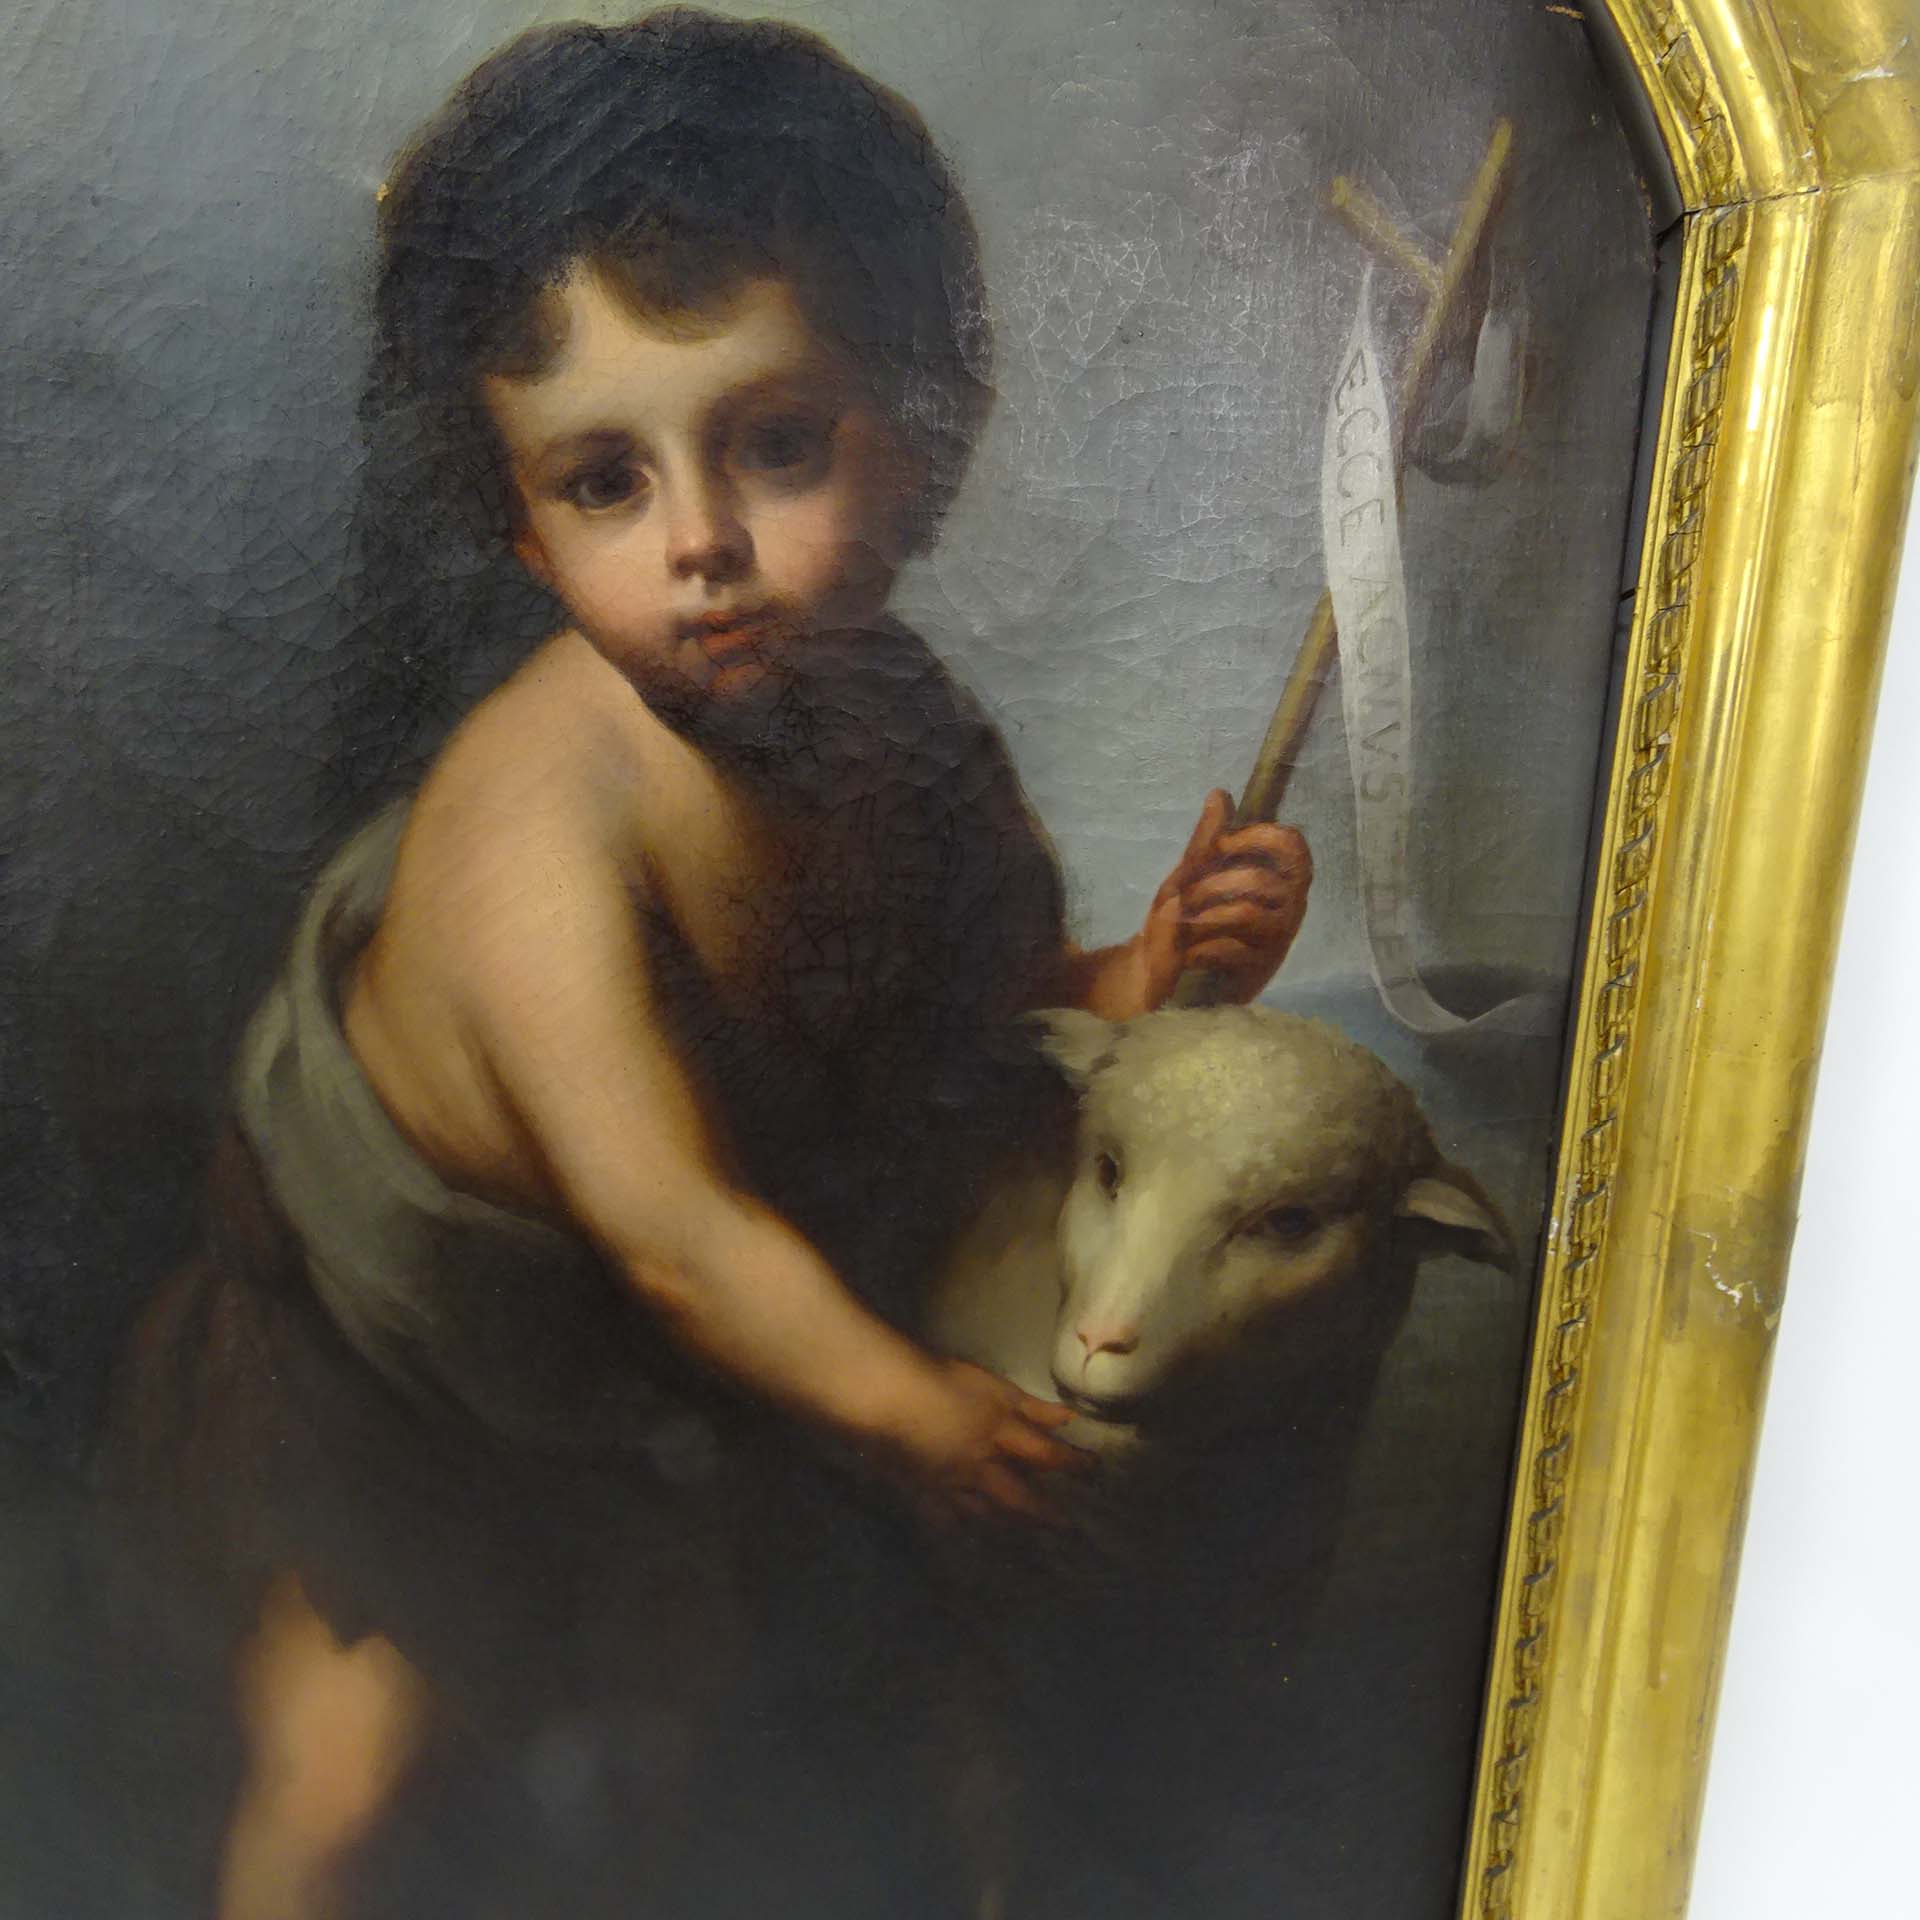 Late 18th or Early 19th Century Old Master Style "St. John the Baptist" Oil on Canvas Painting. 